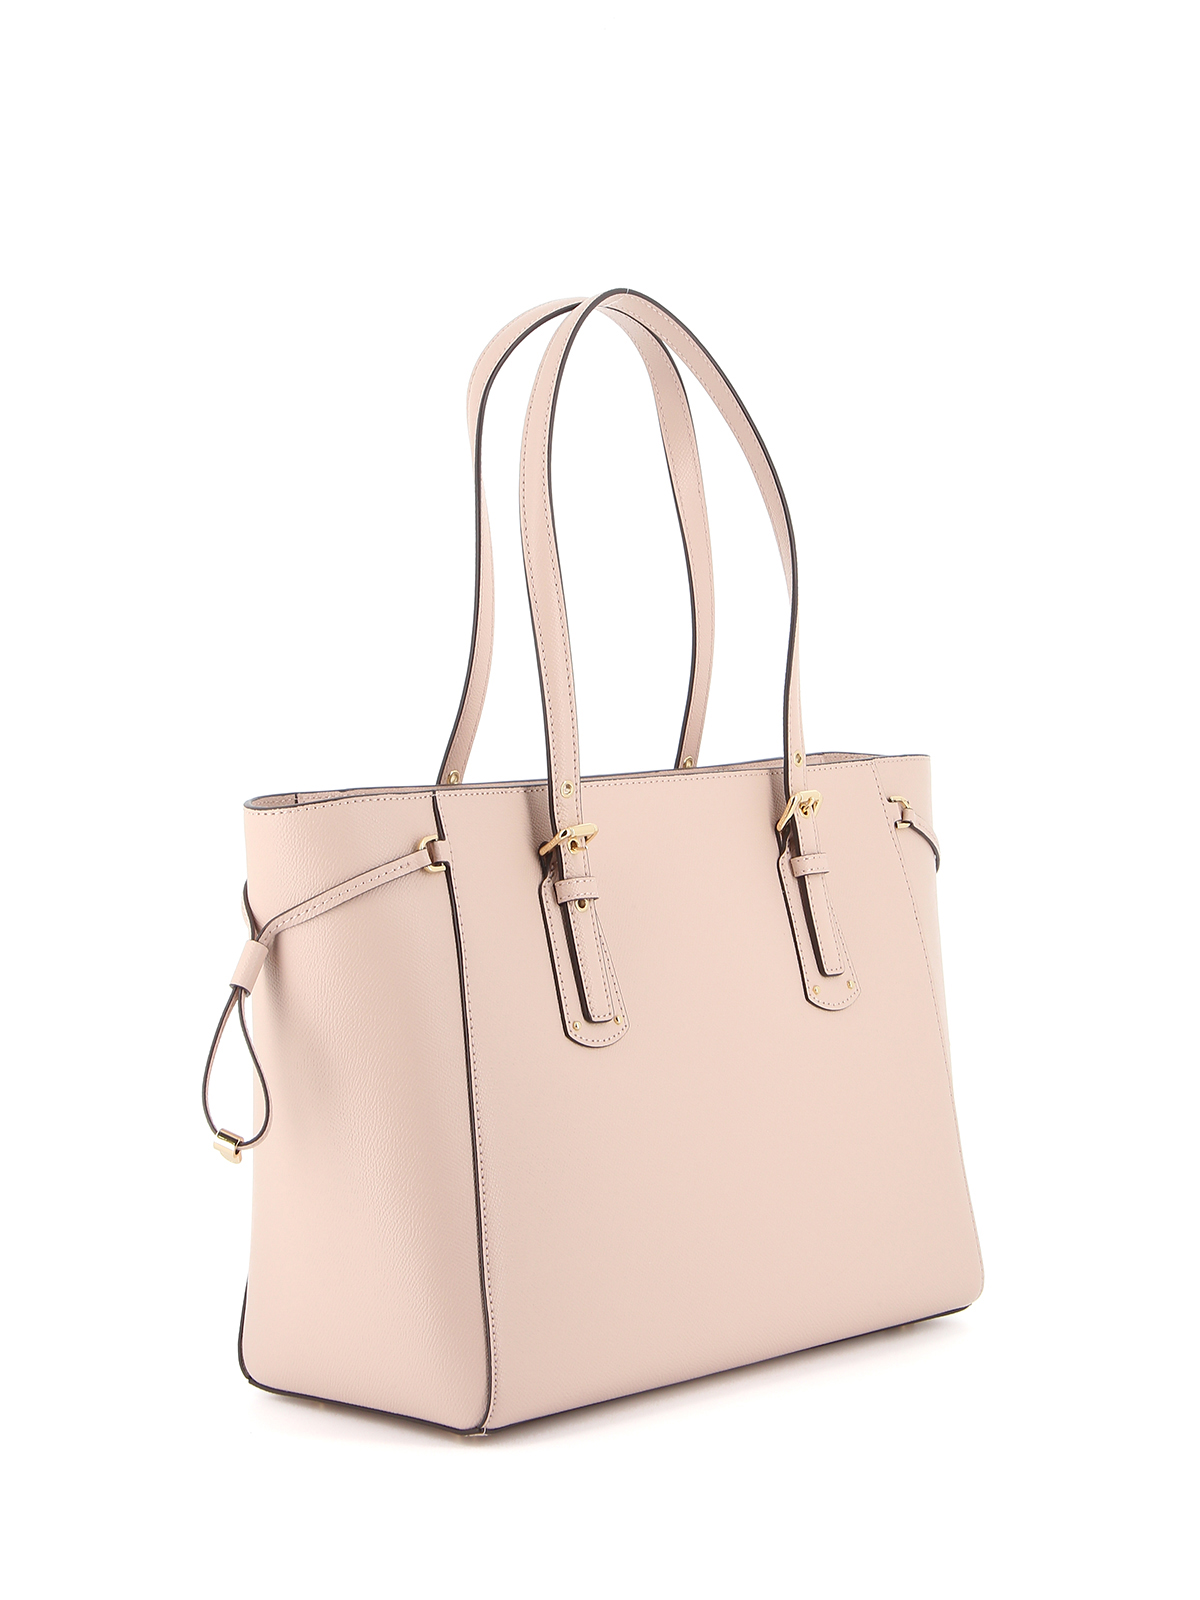 Totes bags Michael Kors - Voyager pink leather medium tote - 30H7GV6T8L187